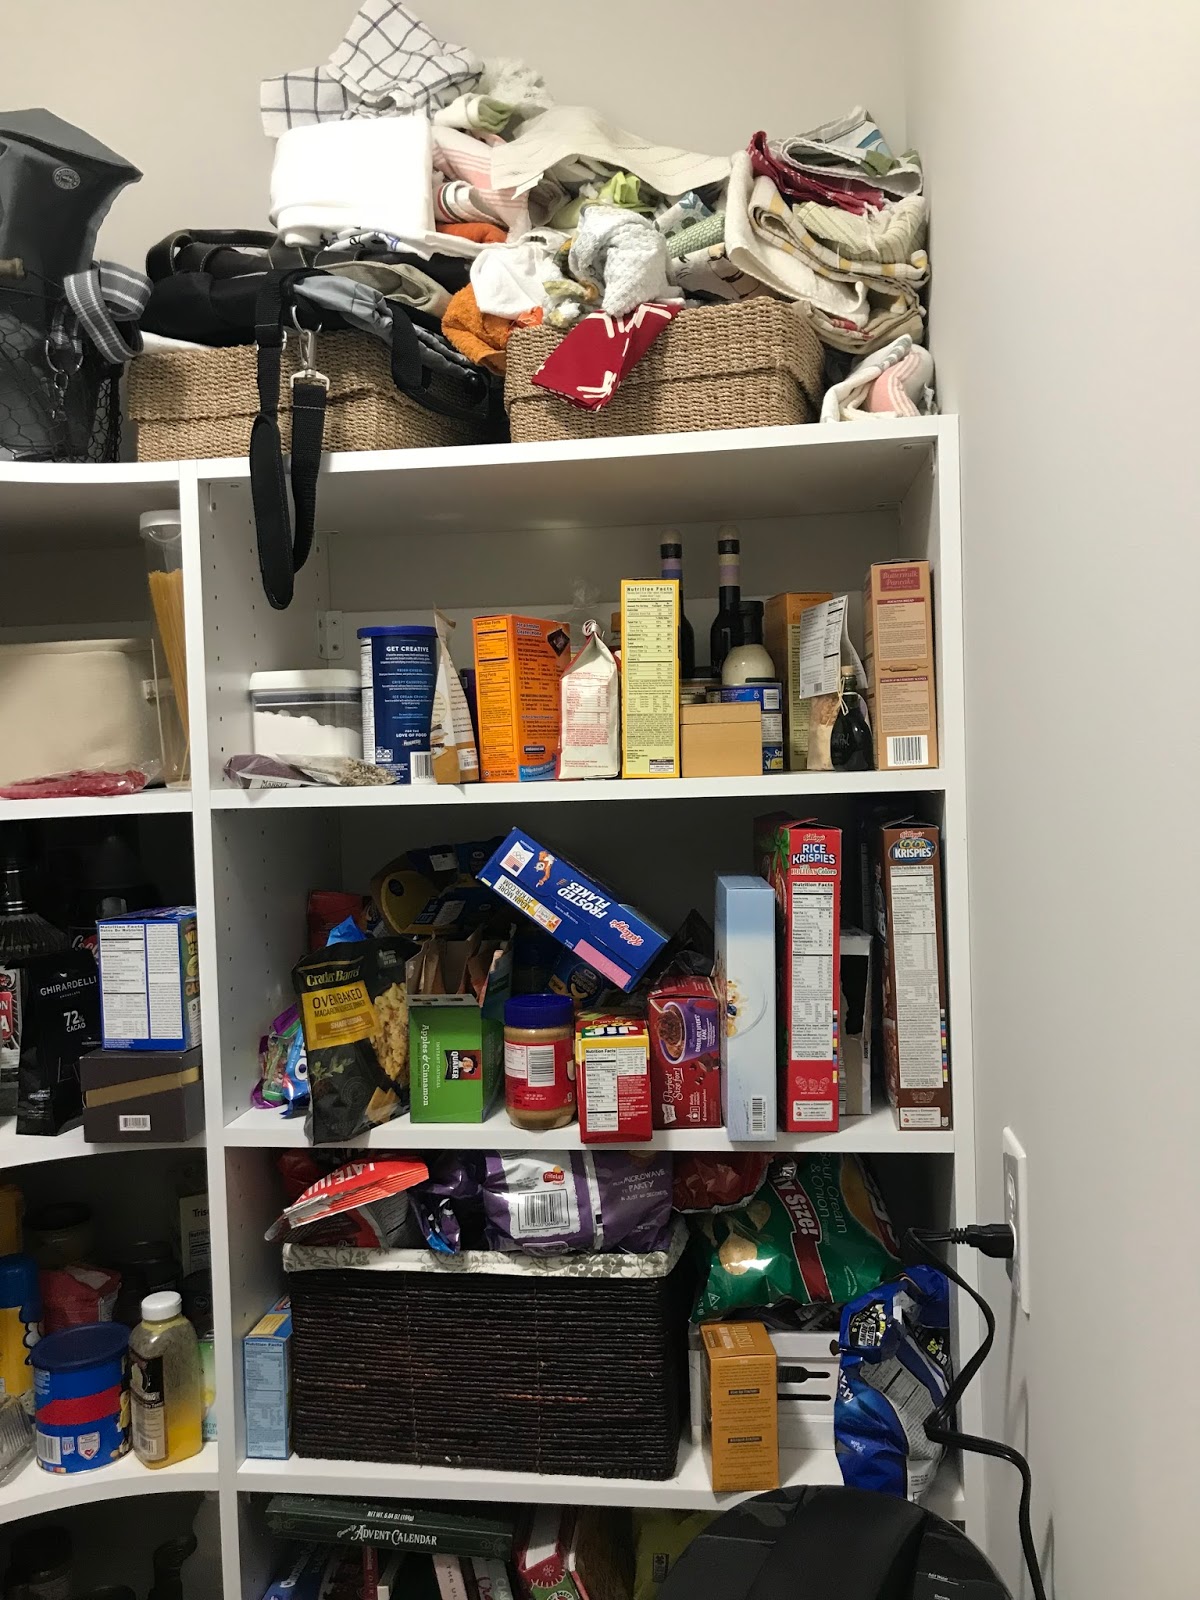 How to organize a messy pantry